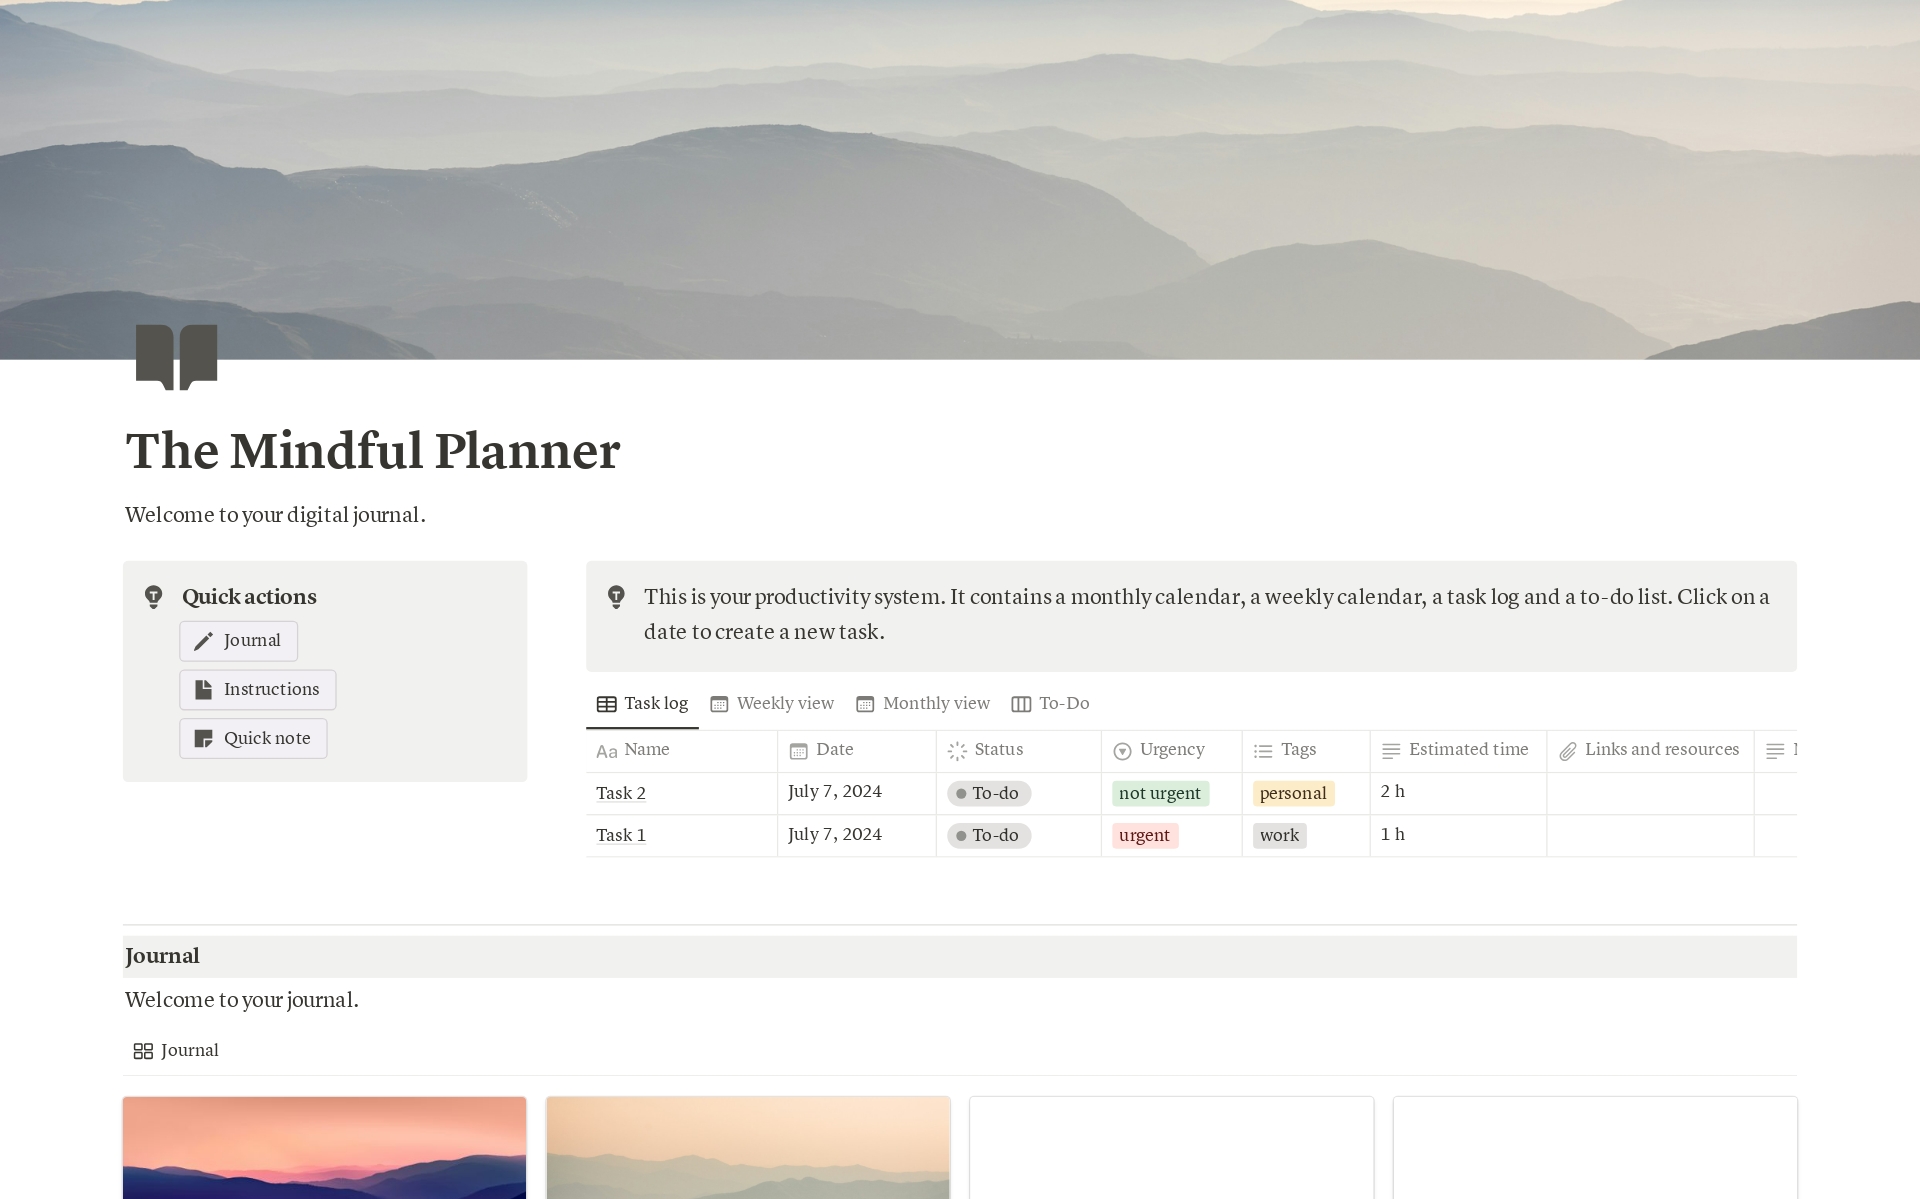 The Mindful Planner is an advanced Notion dashboard that combines productivity and self-care in a concise, practical way.